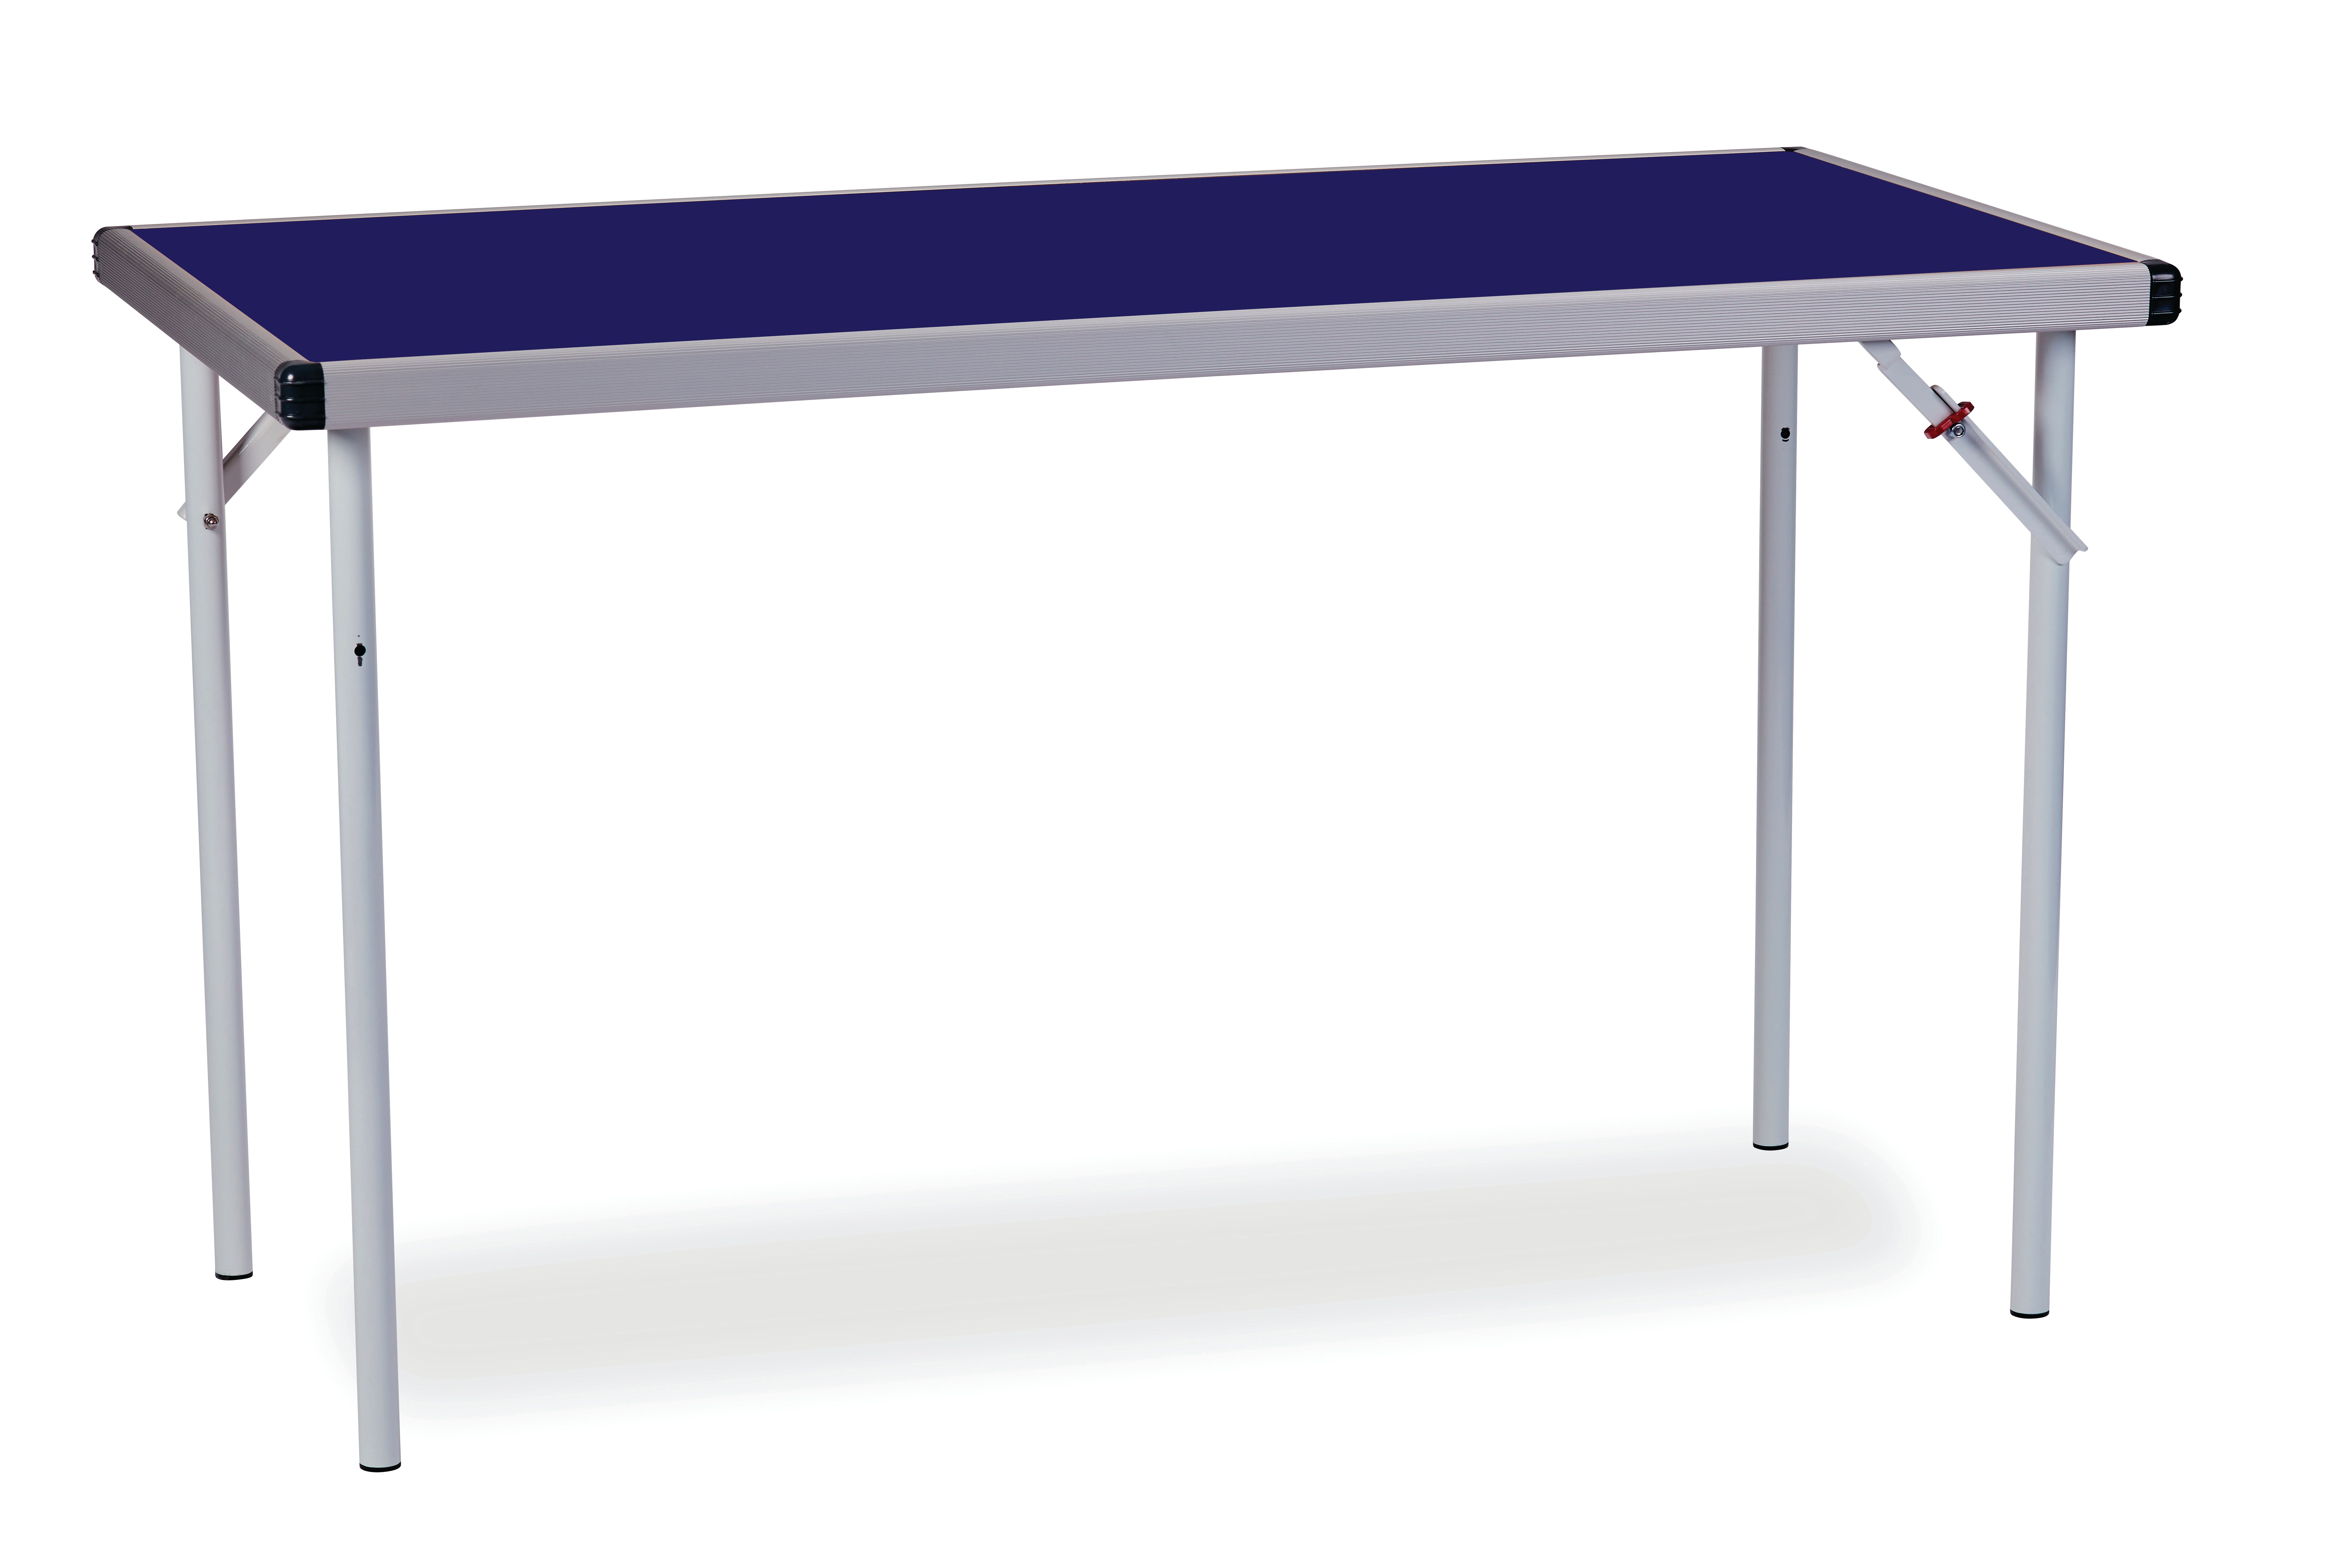 FastFold Rect Tables 1220x610 H710 Blue